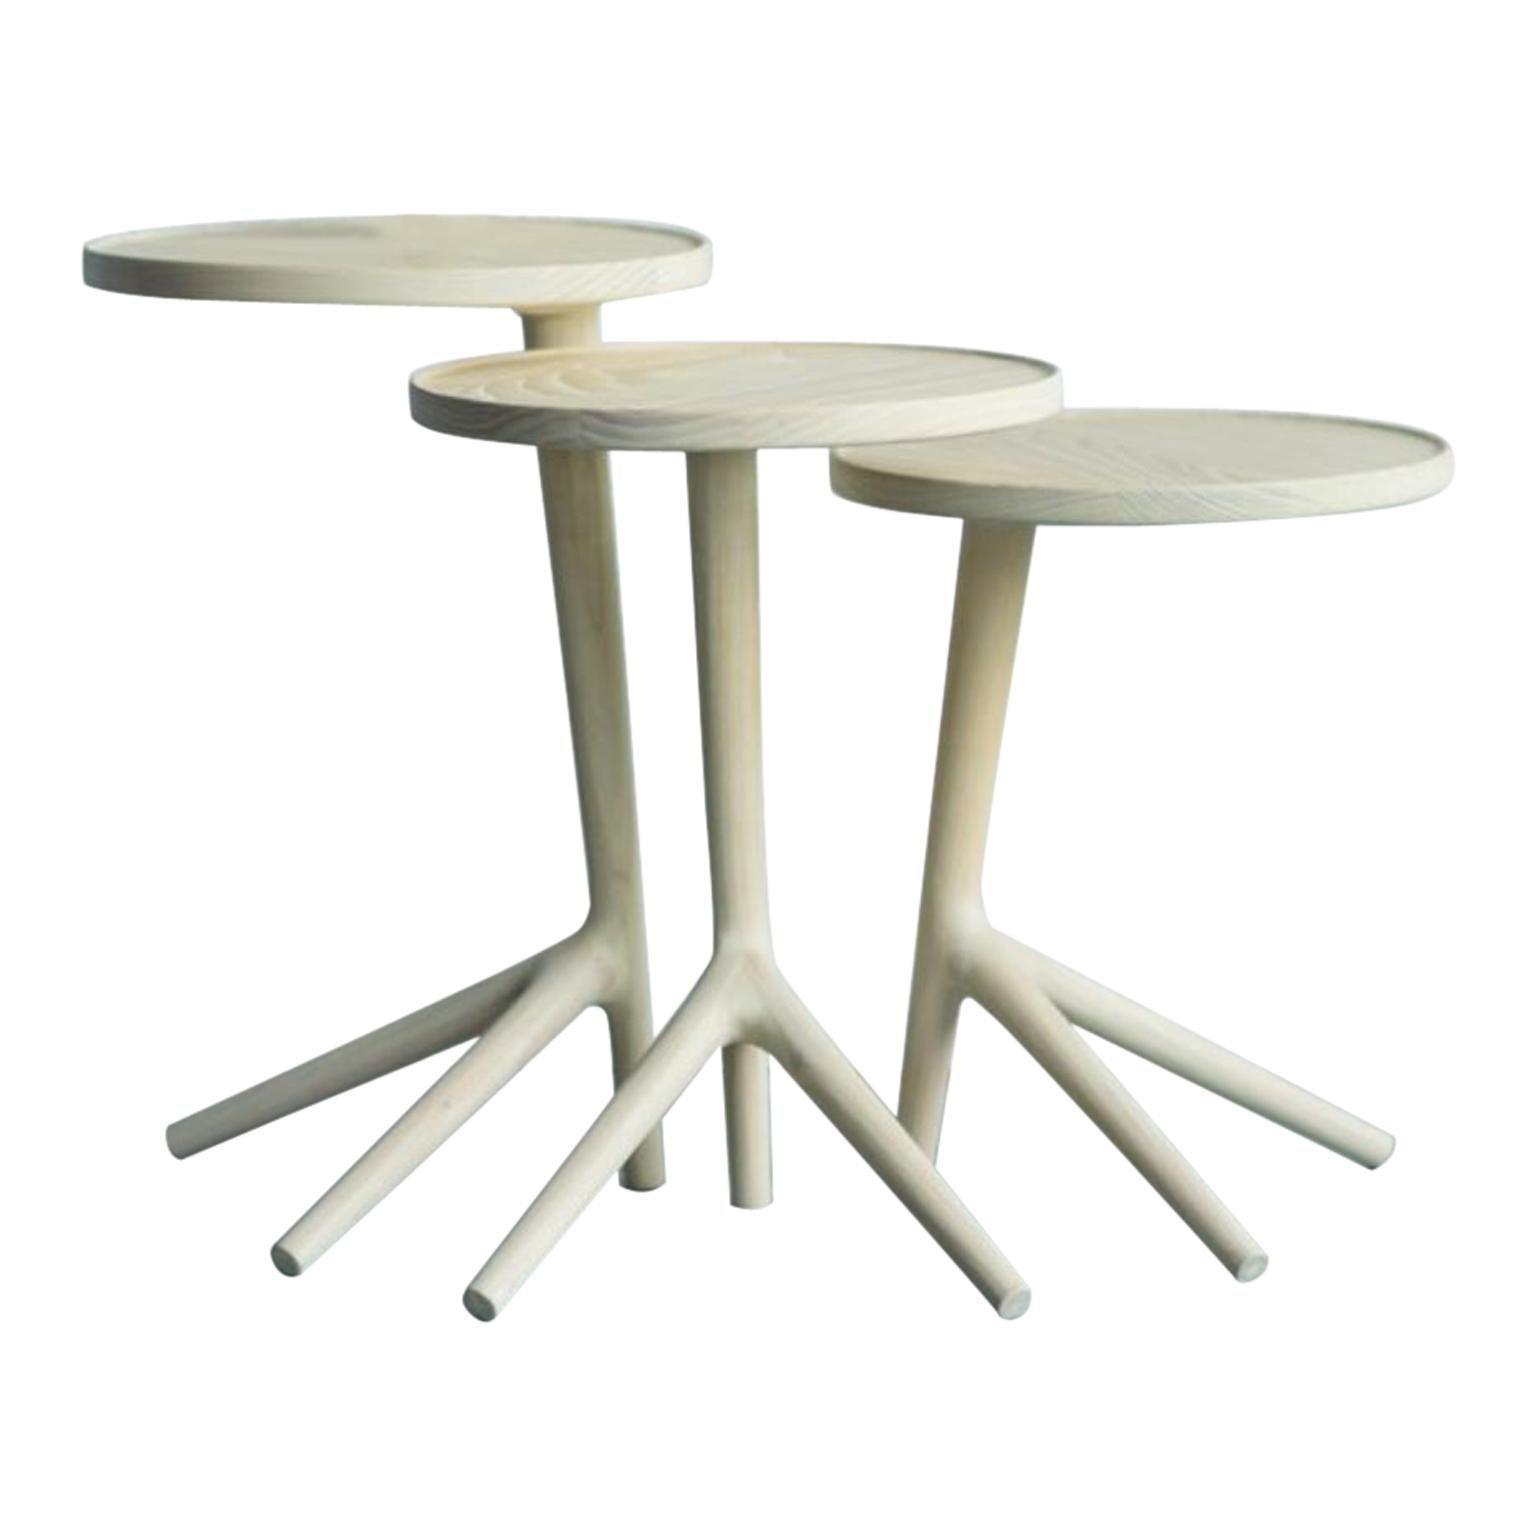 Set of 3 White Ash Tripod Table by Fernweh Woodworking